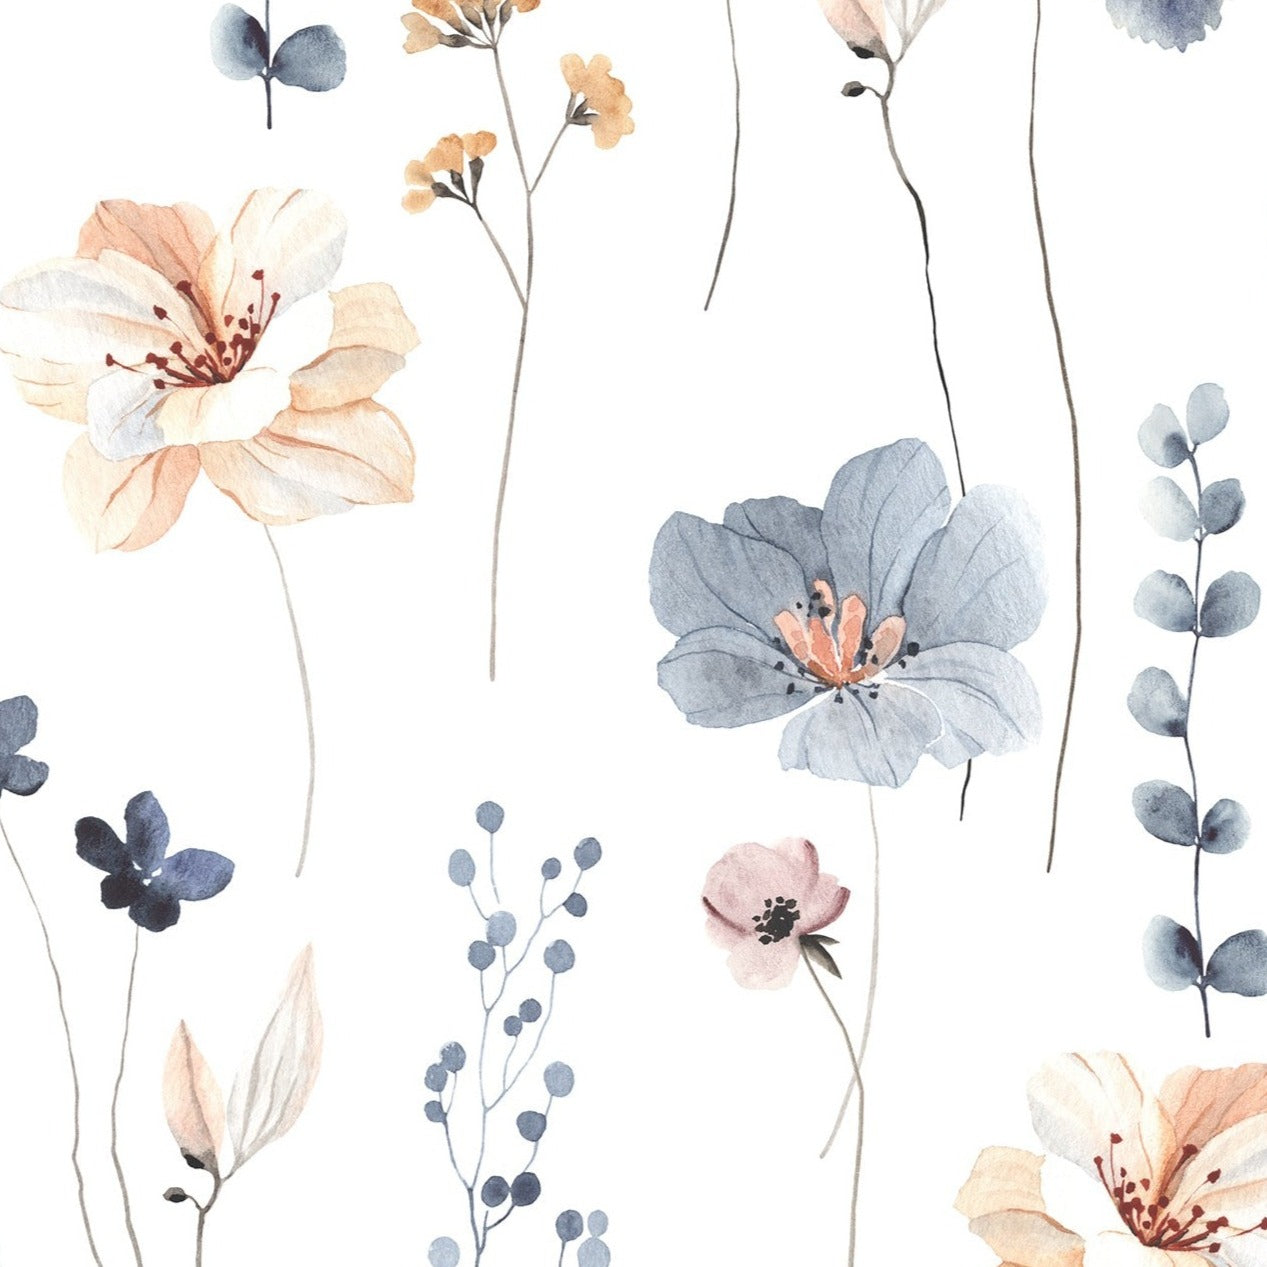 A seamless pattern of the Watercolour Floral - Summer wallpaper, showcasing soft watercolor flowers in shades of blue, peach, and tan on a white background, evoking a breezy summer garden.